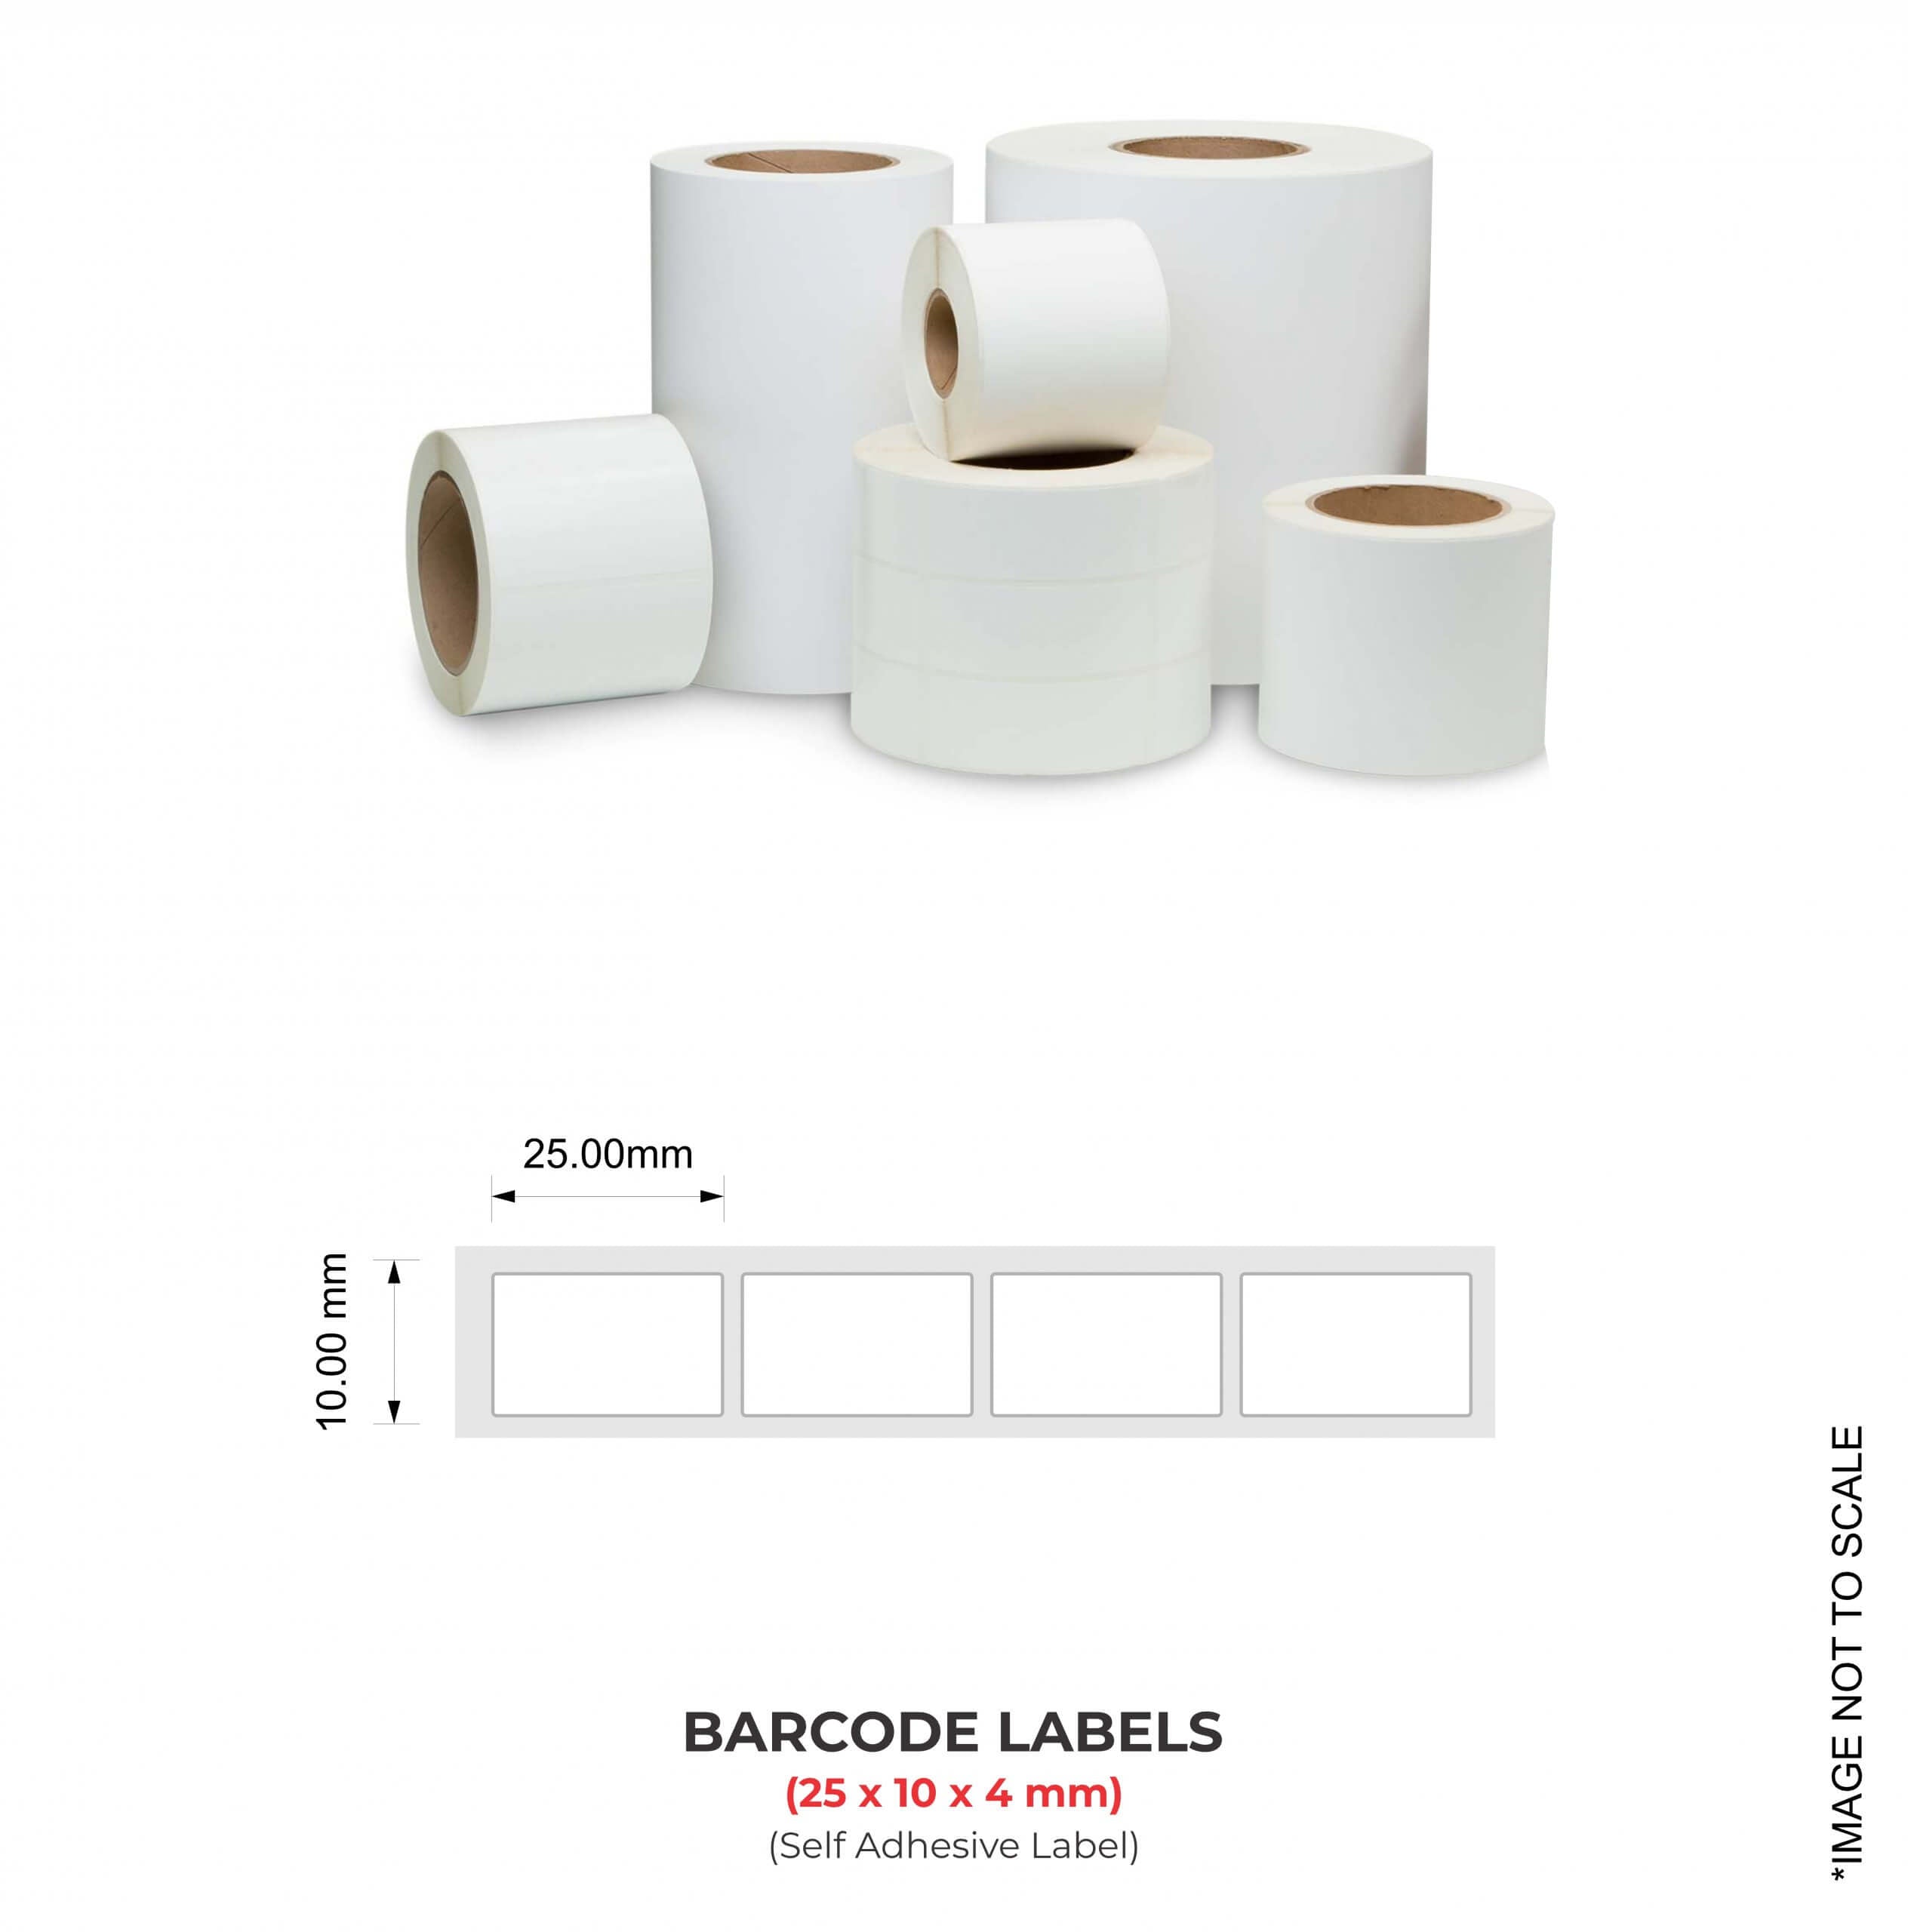 Barcode Labels (25mm x 10mm x 4), 20000 Labels Per Roll (Self Adhesive Label)